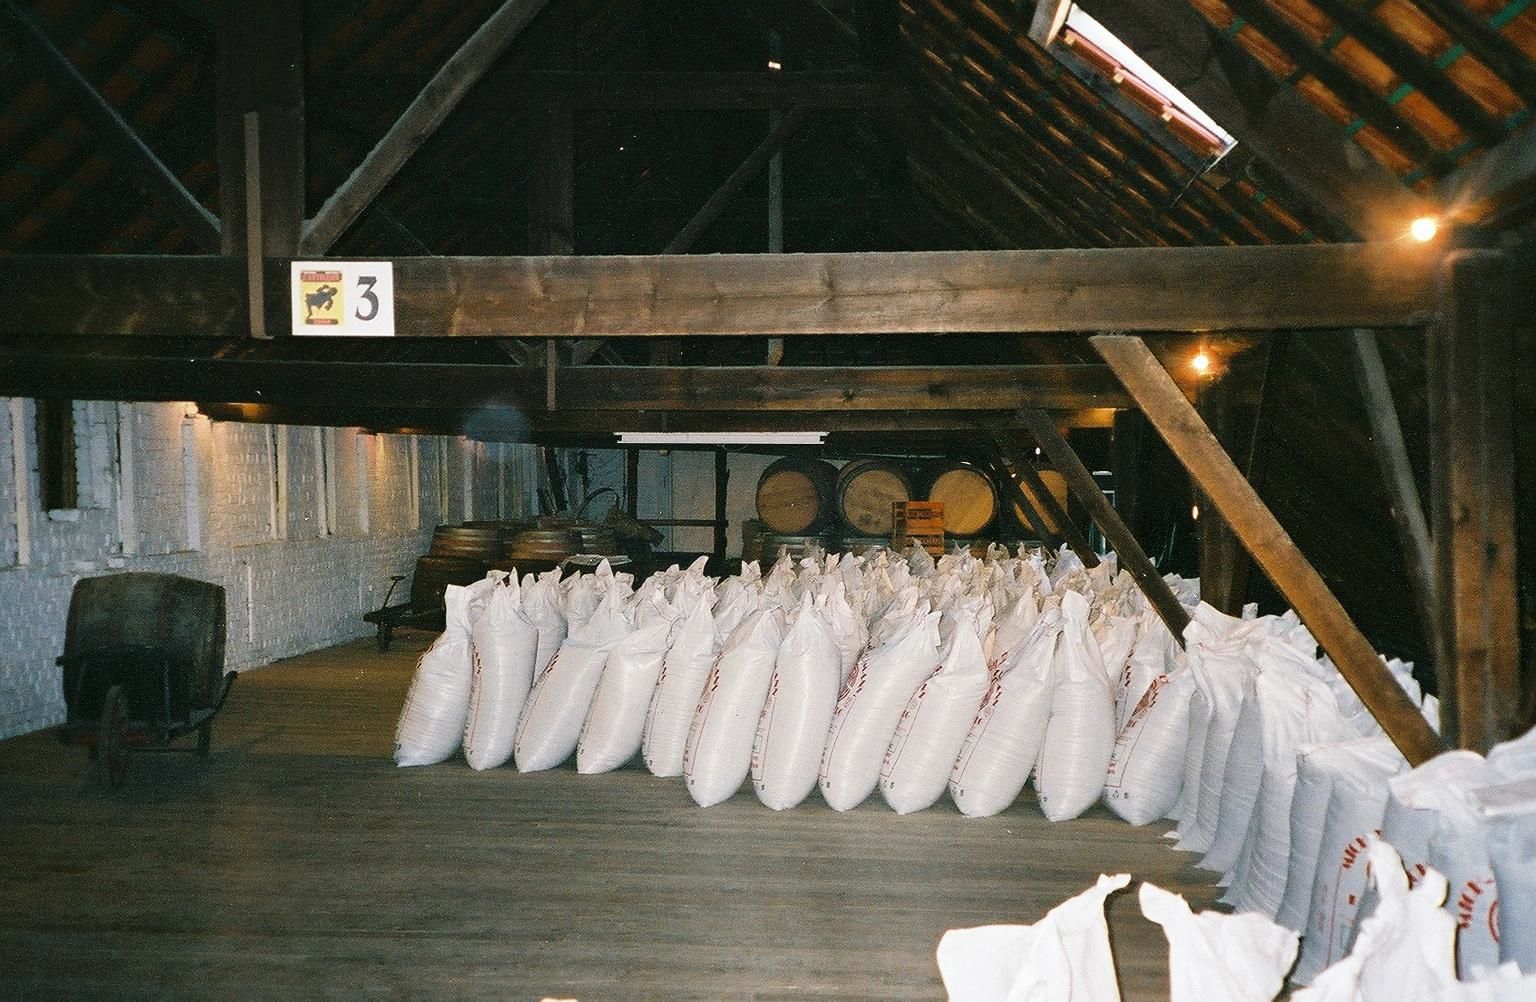 Sacks of grain at Cantillon Brewery, Brussels. My own photo.